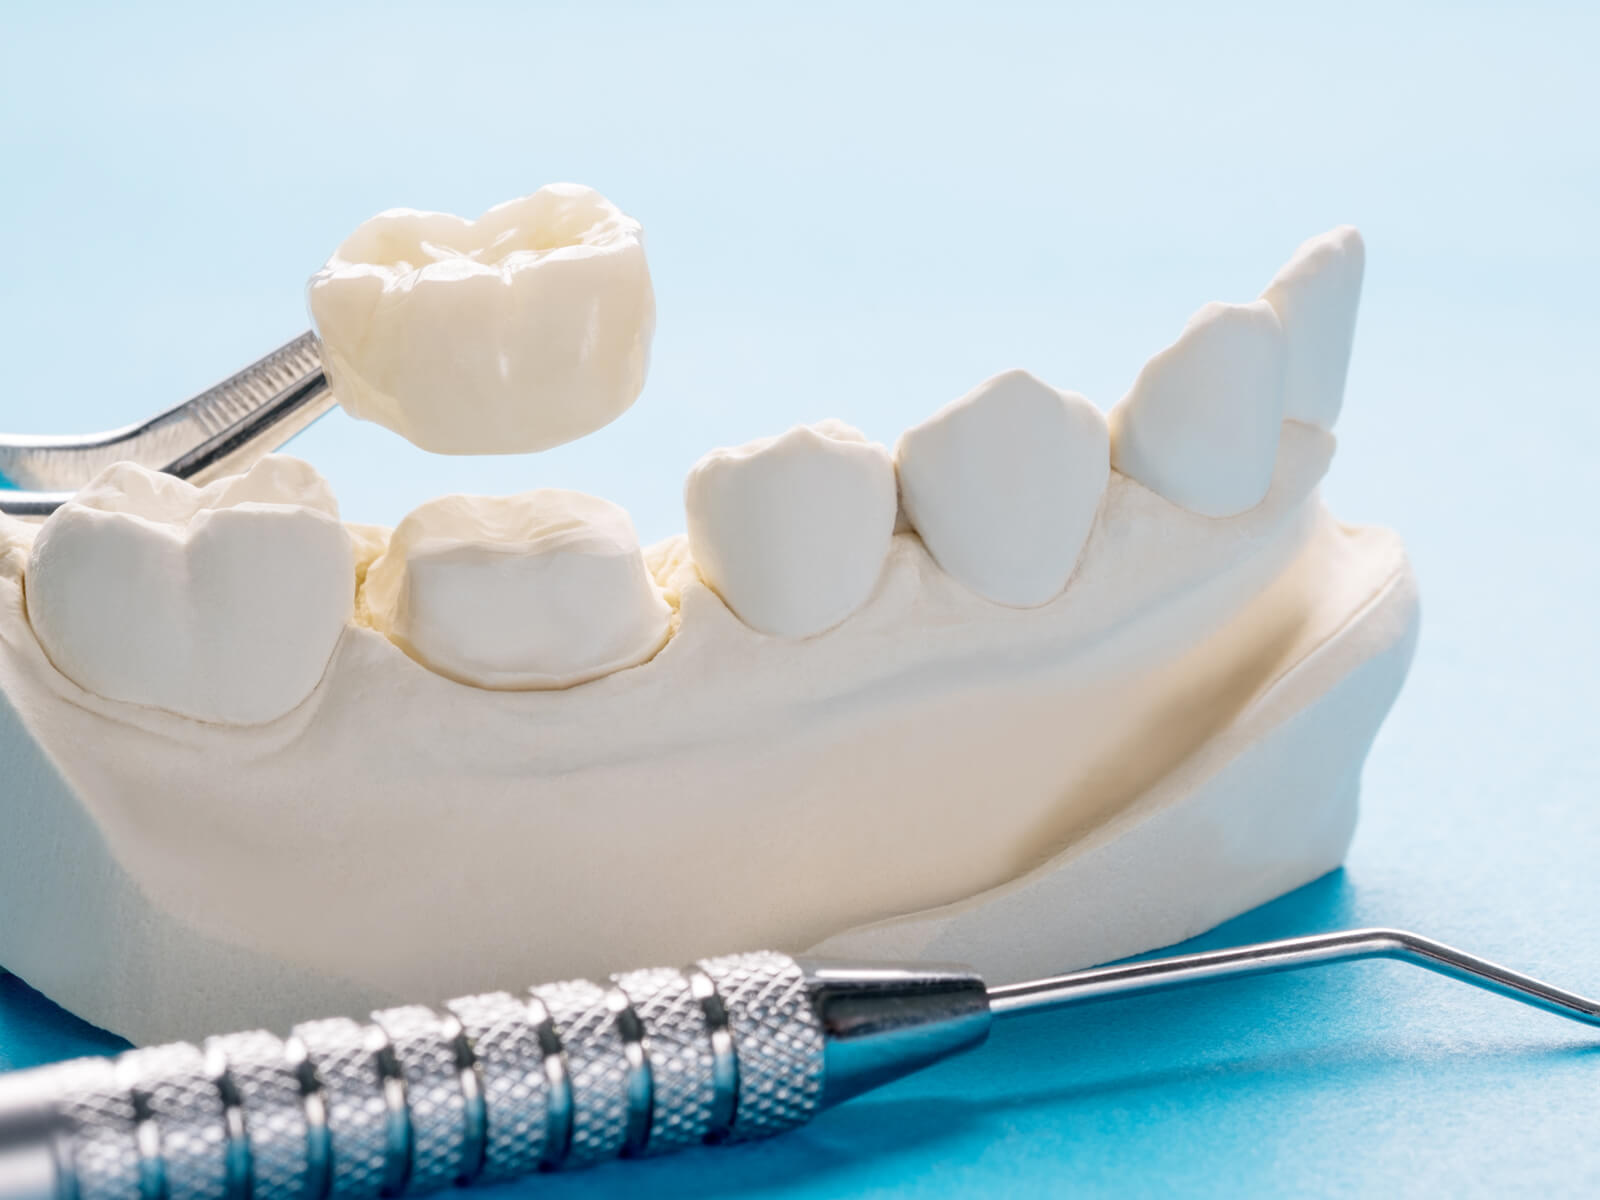 What is the Most Natural Looking Dental Crown?